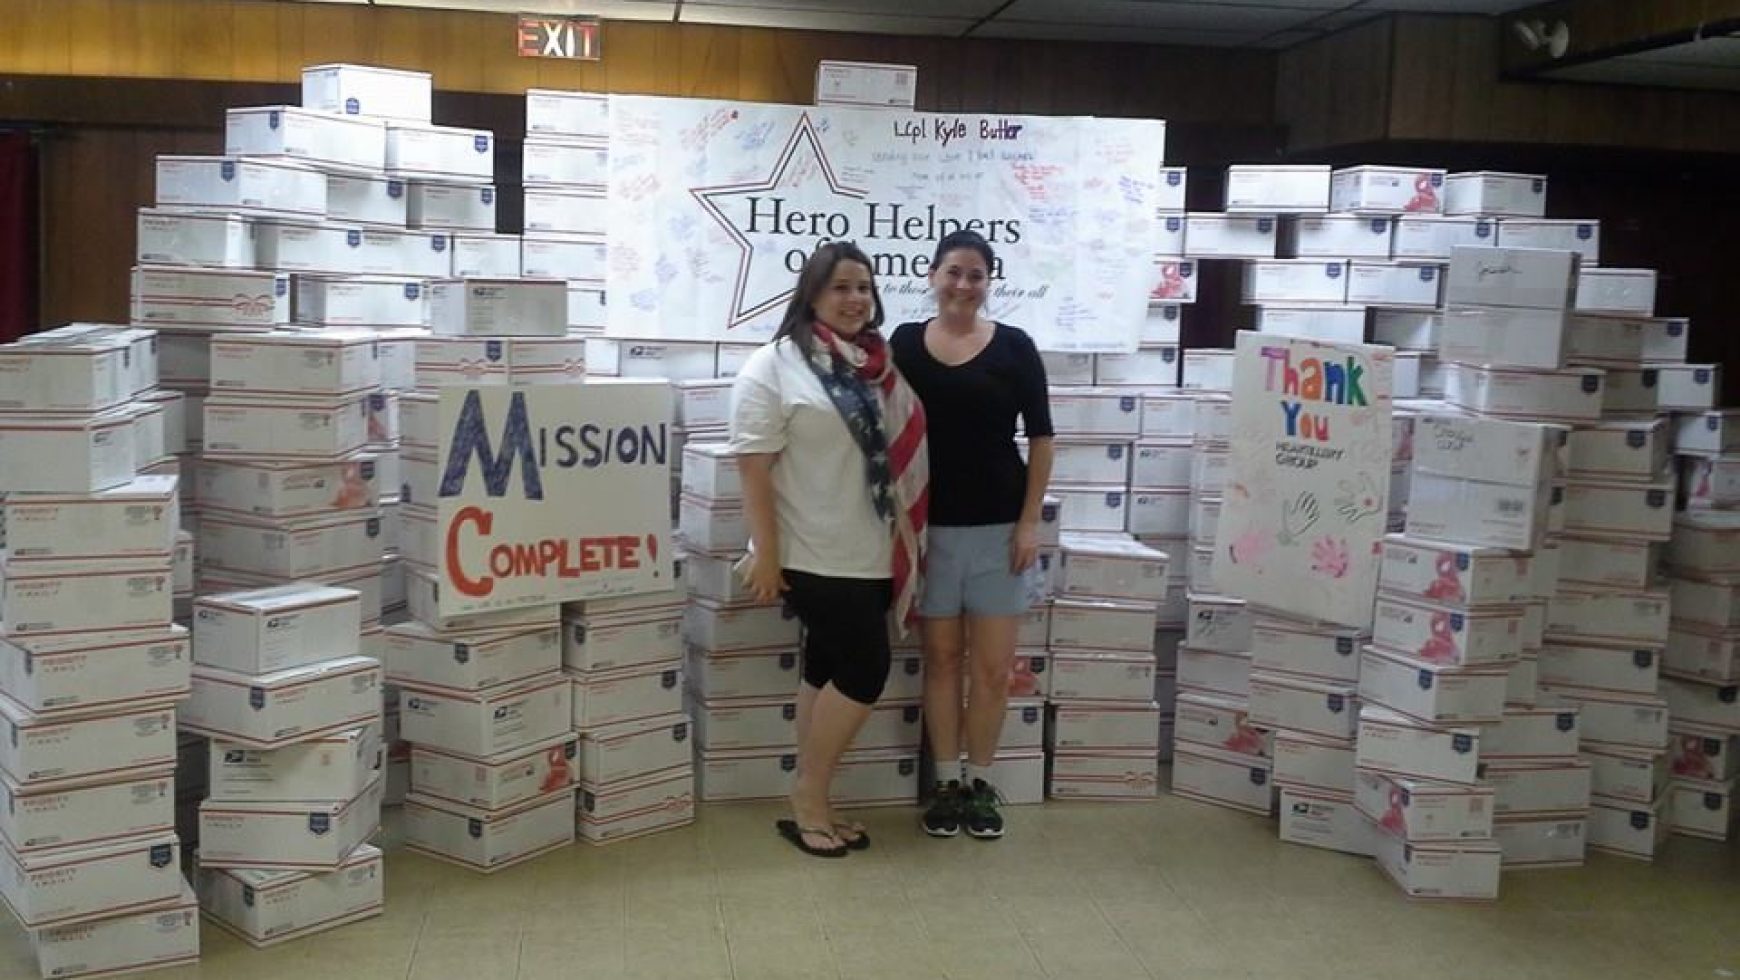 Heartillery Group and Hero Helpers partner to create over 600 care packages for active soldiers